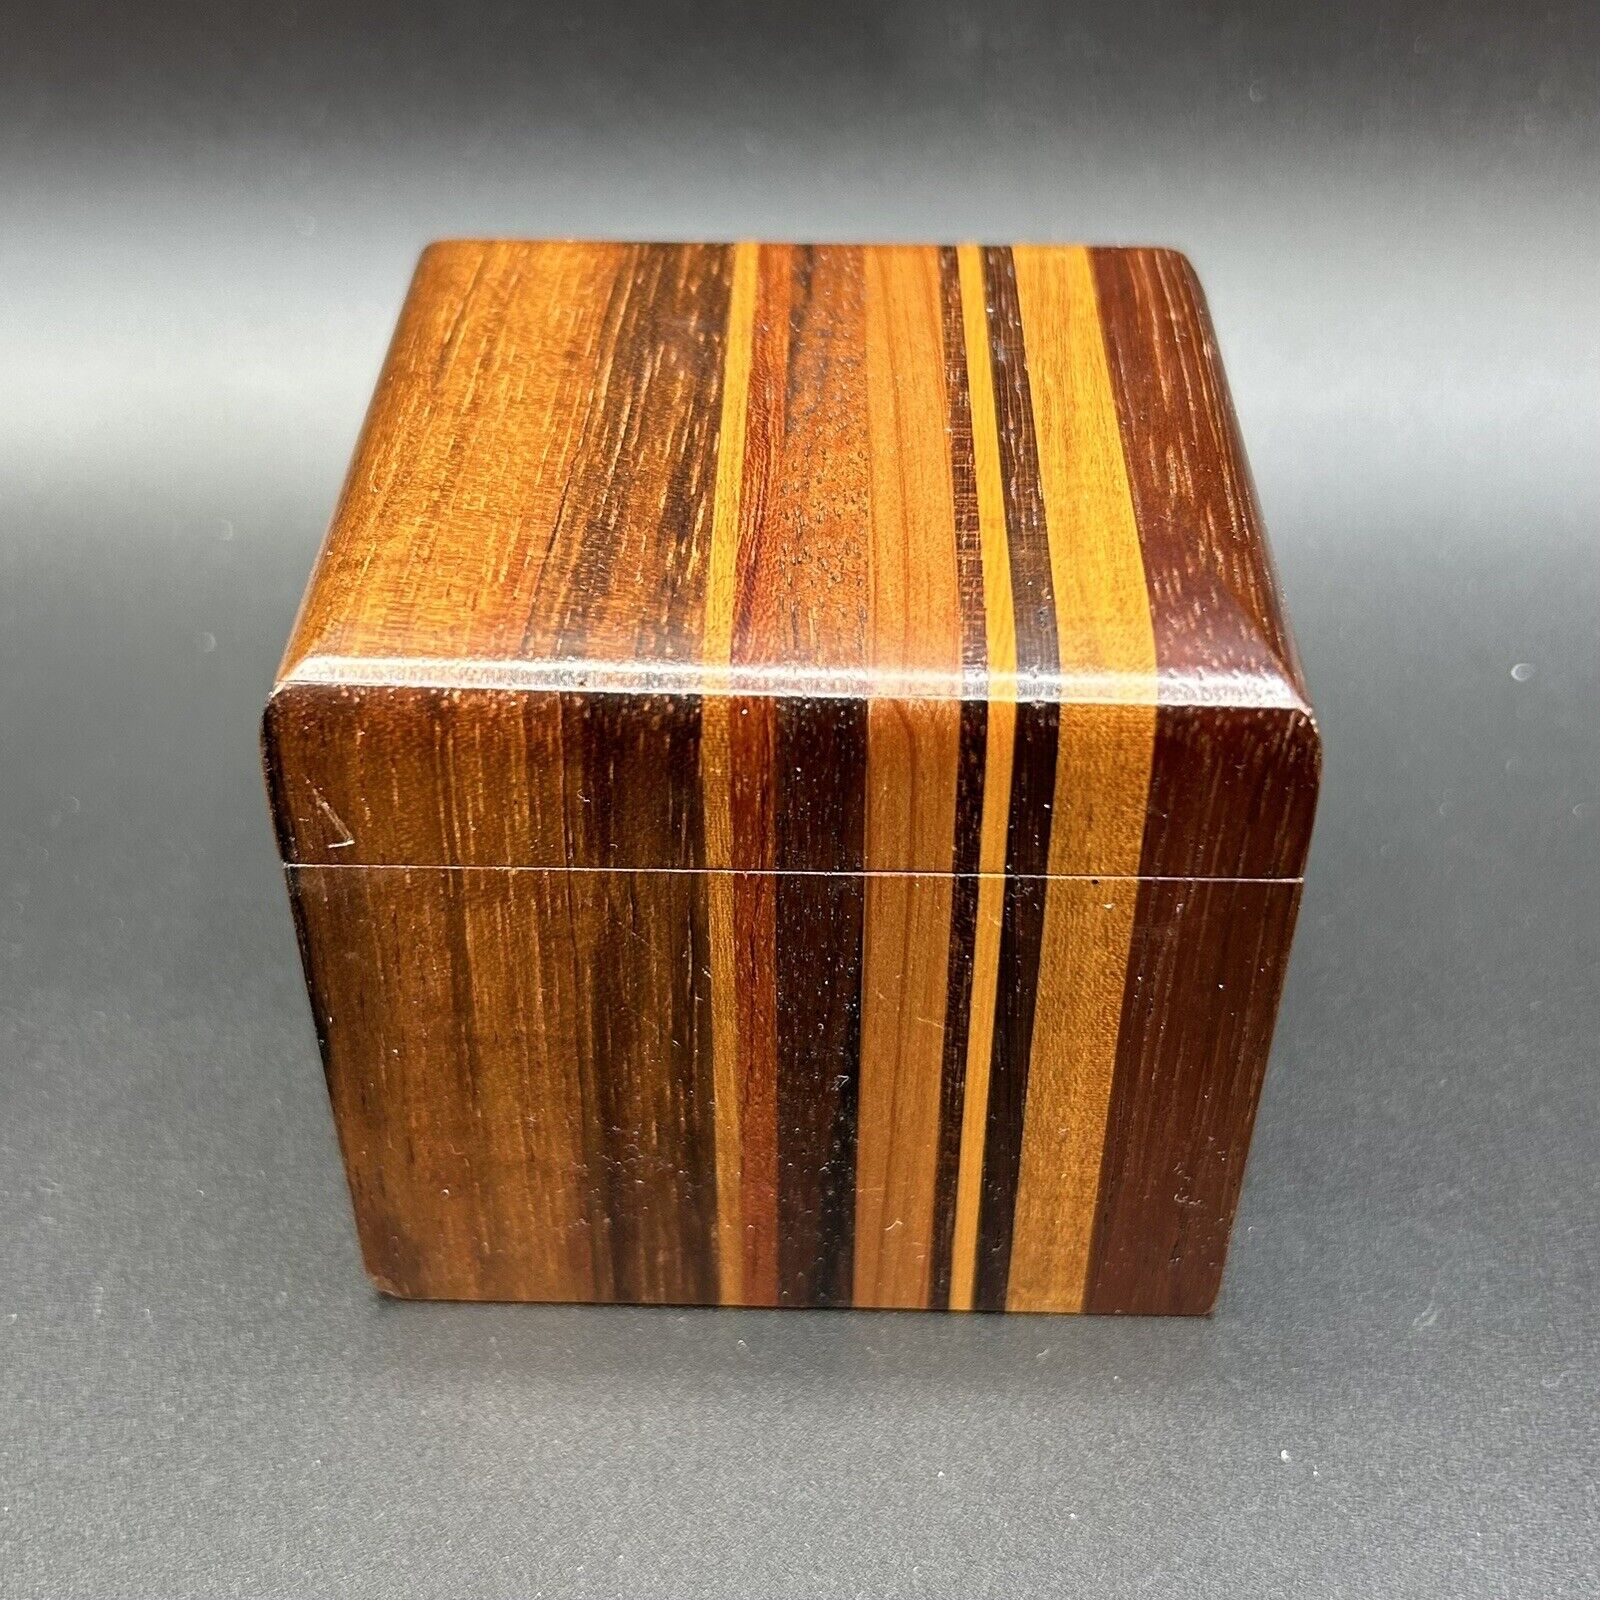 Beautifully Constructed Signed Handmade Wooden Square Trinket Box 2.5”